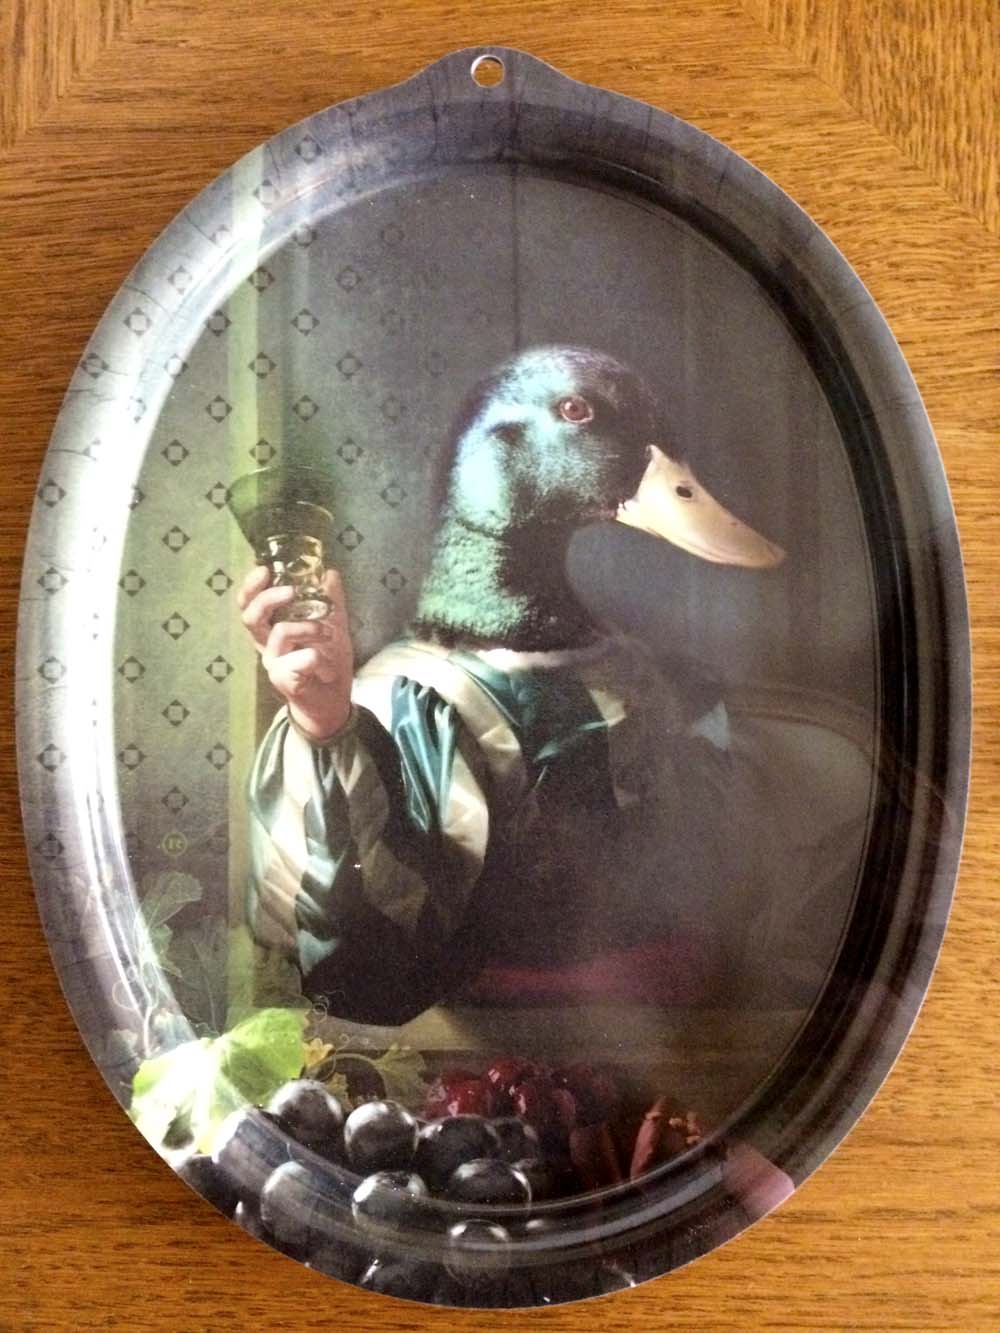 a wonderful tray with a man-handed mallard! what shall i name him?